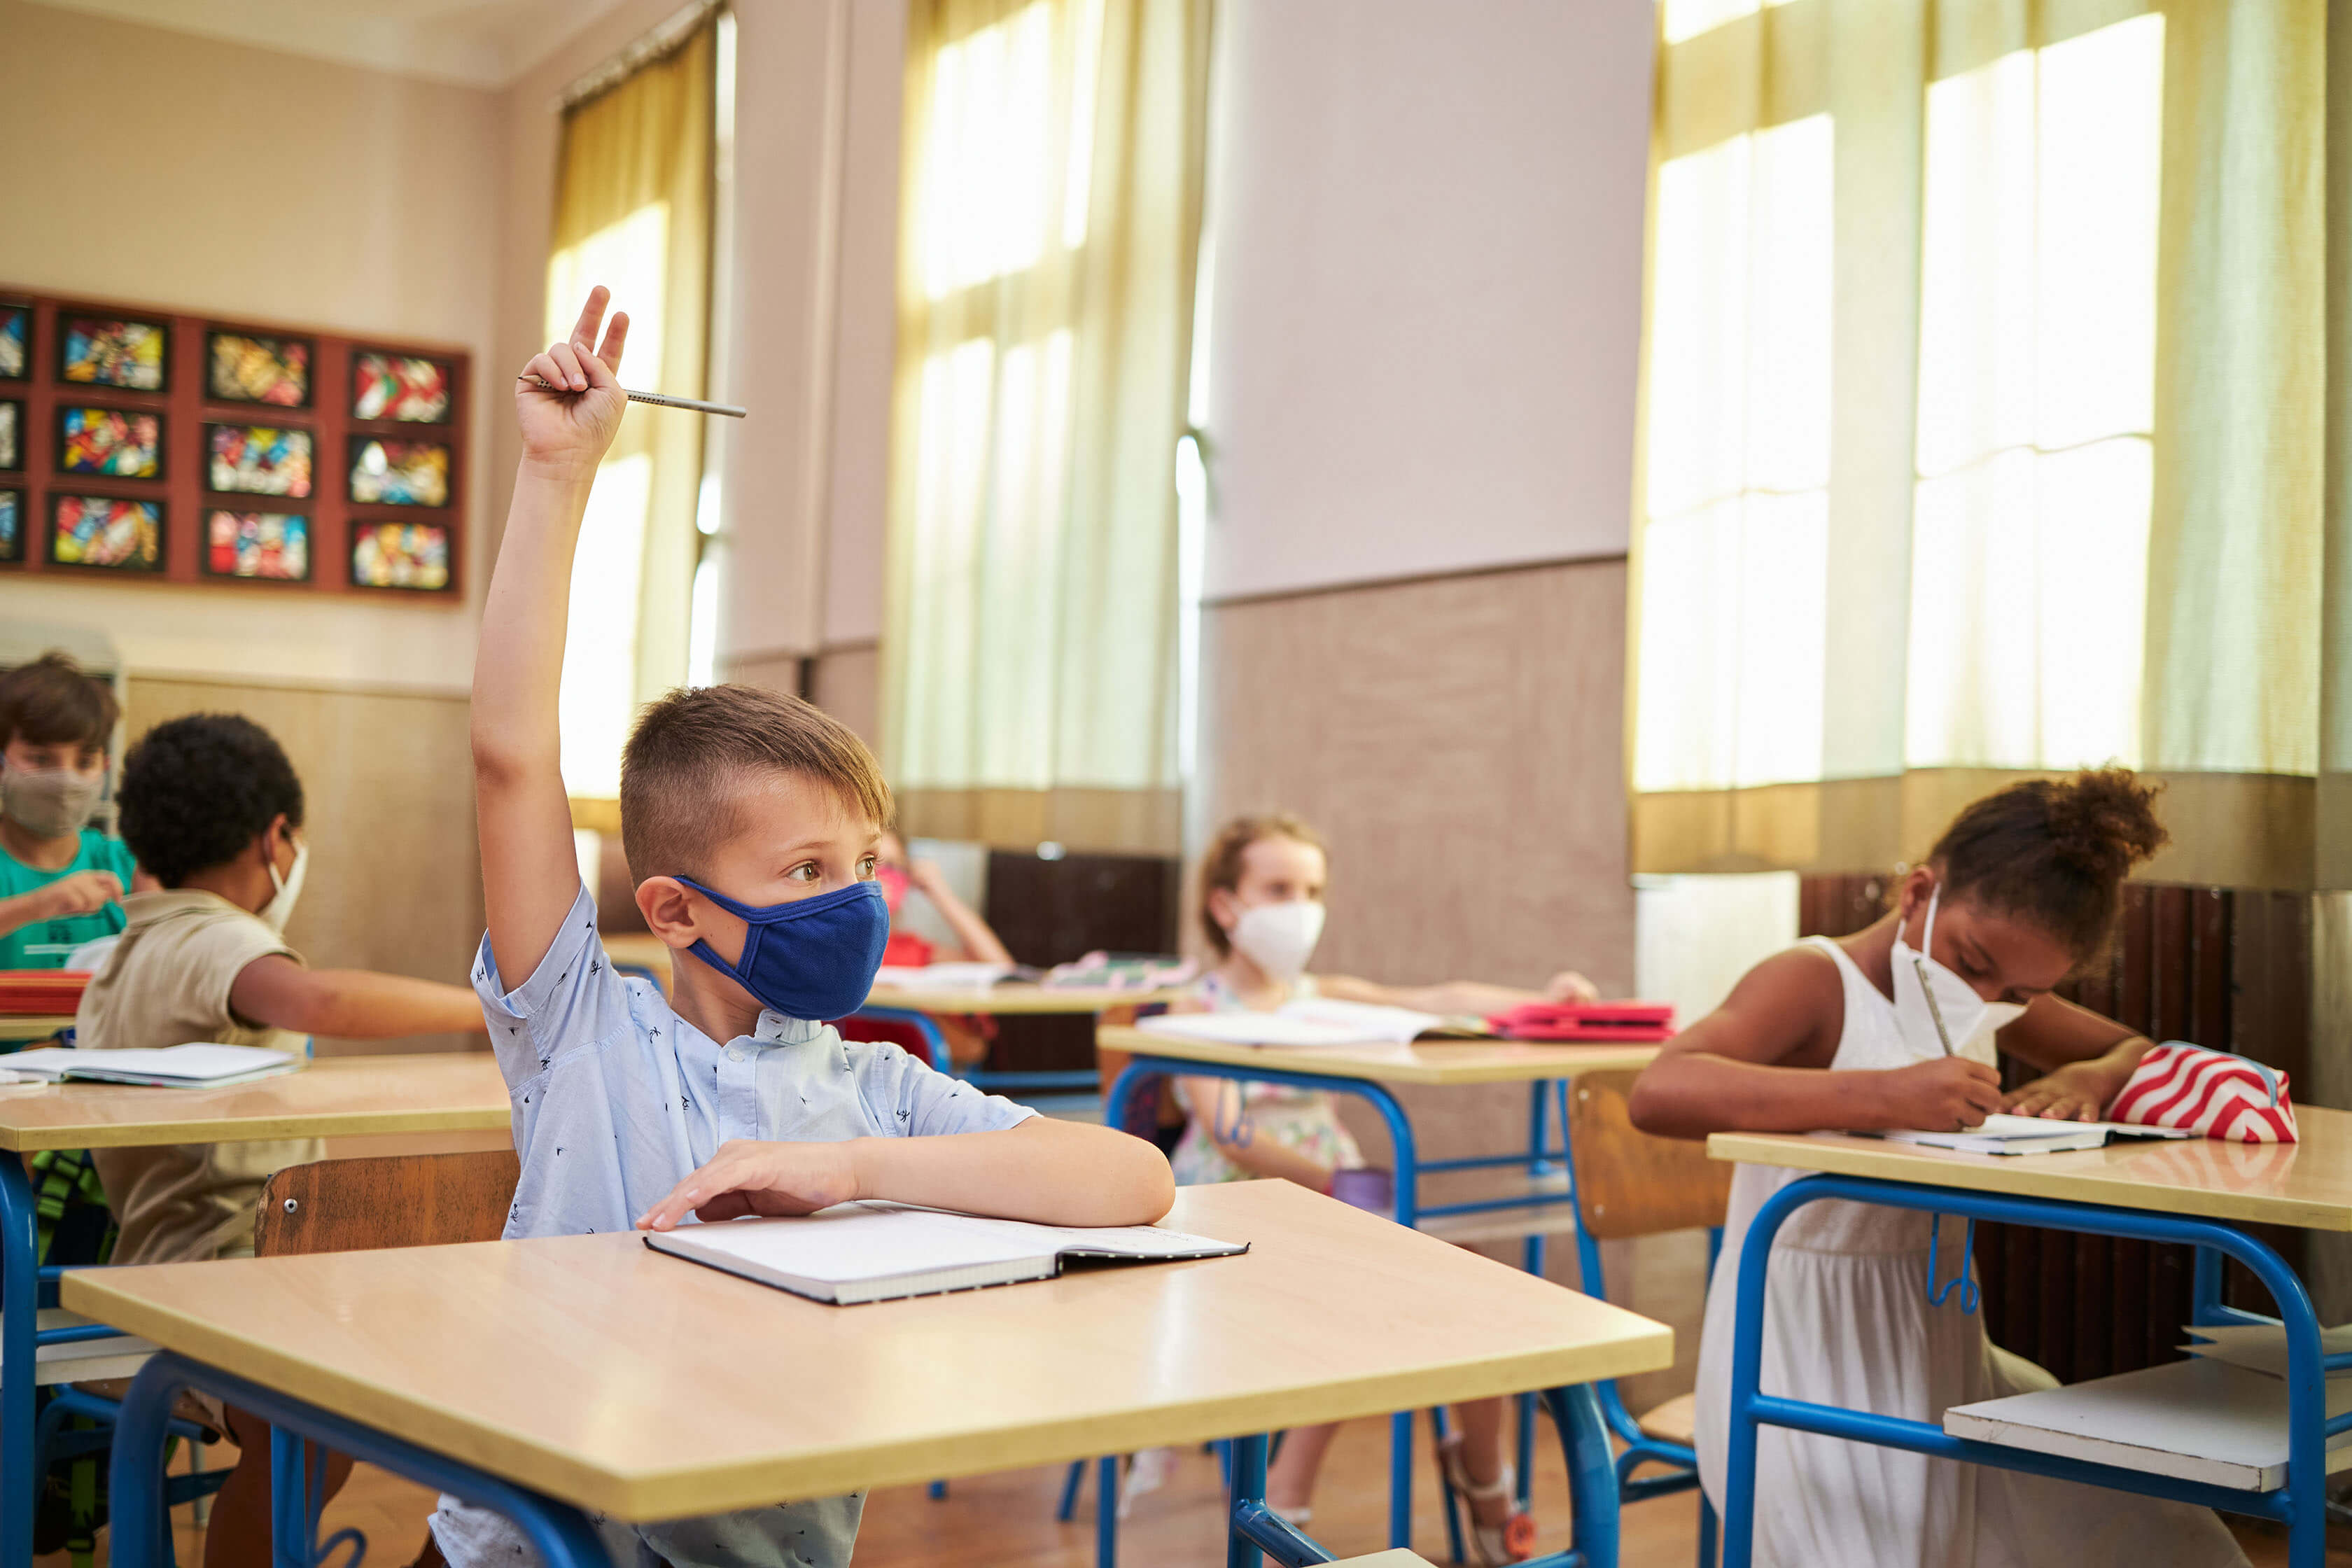 A boy raising his hand, while wearing a mask, in a classroom